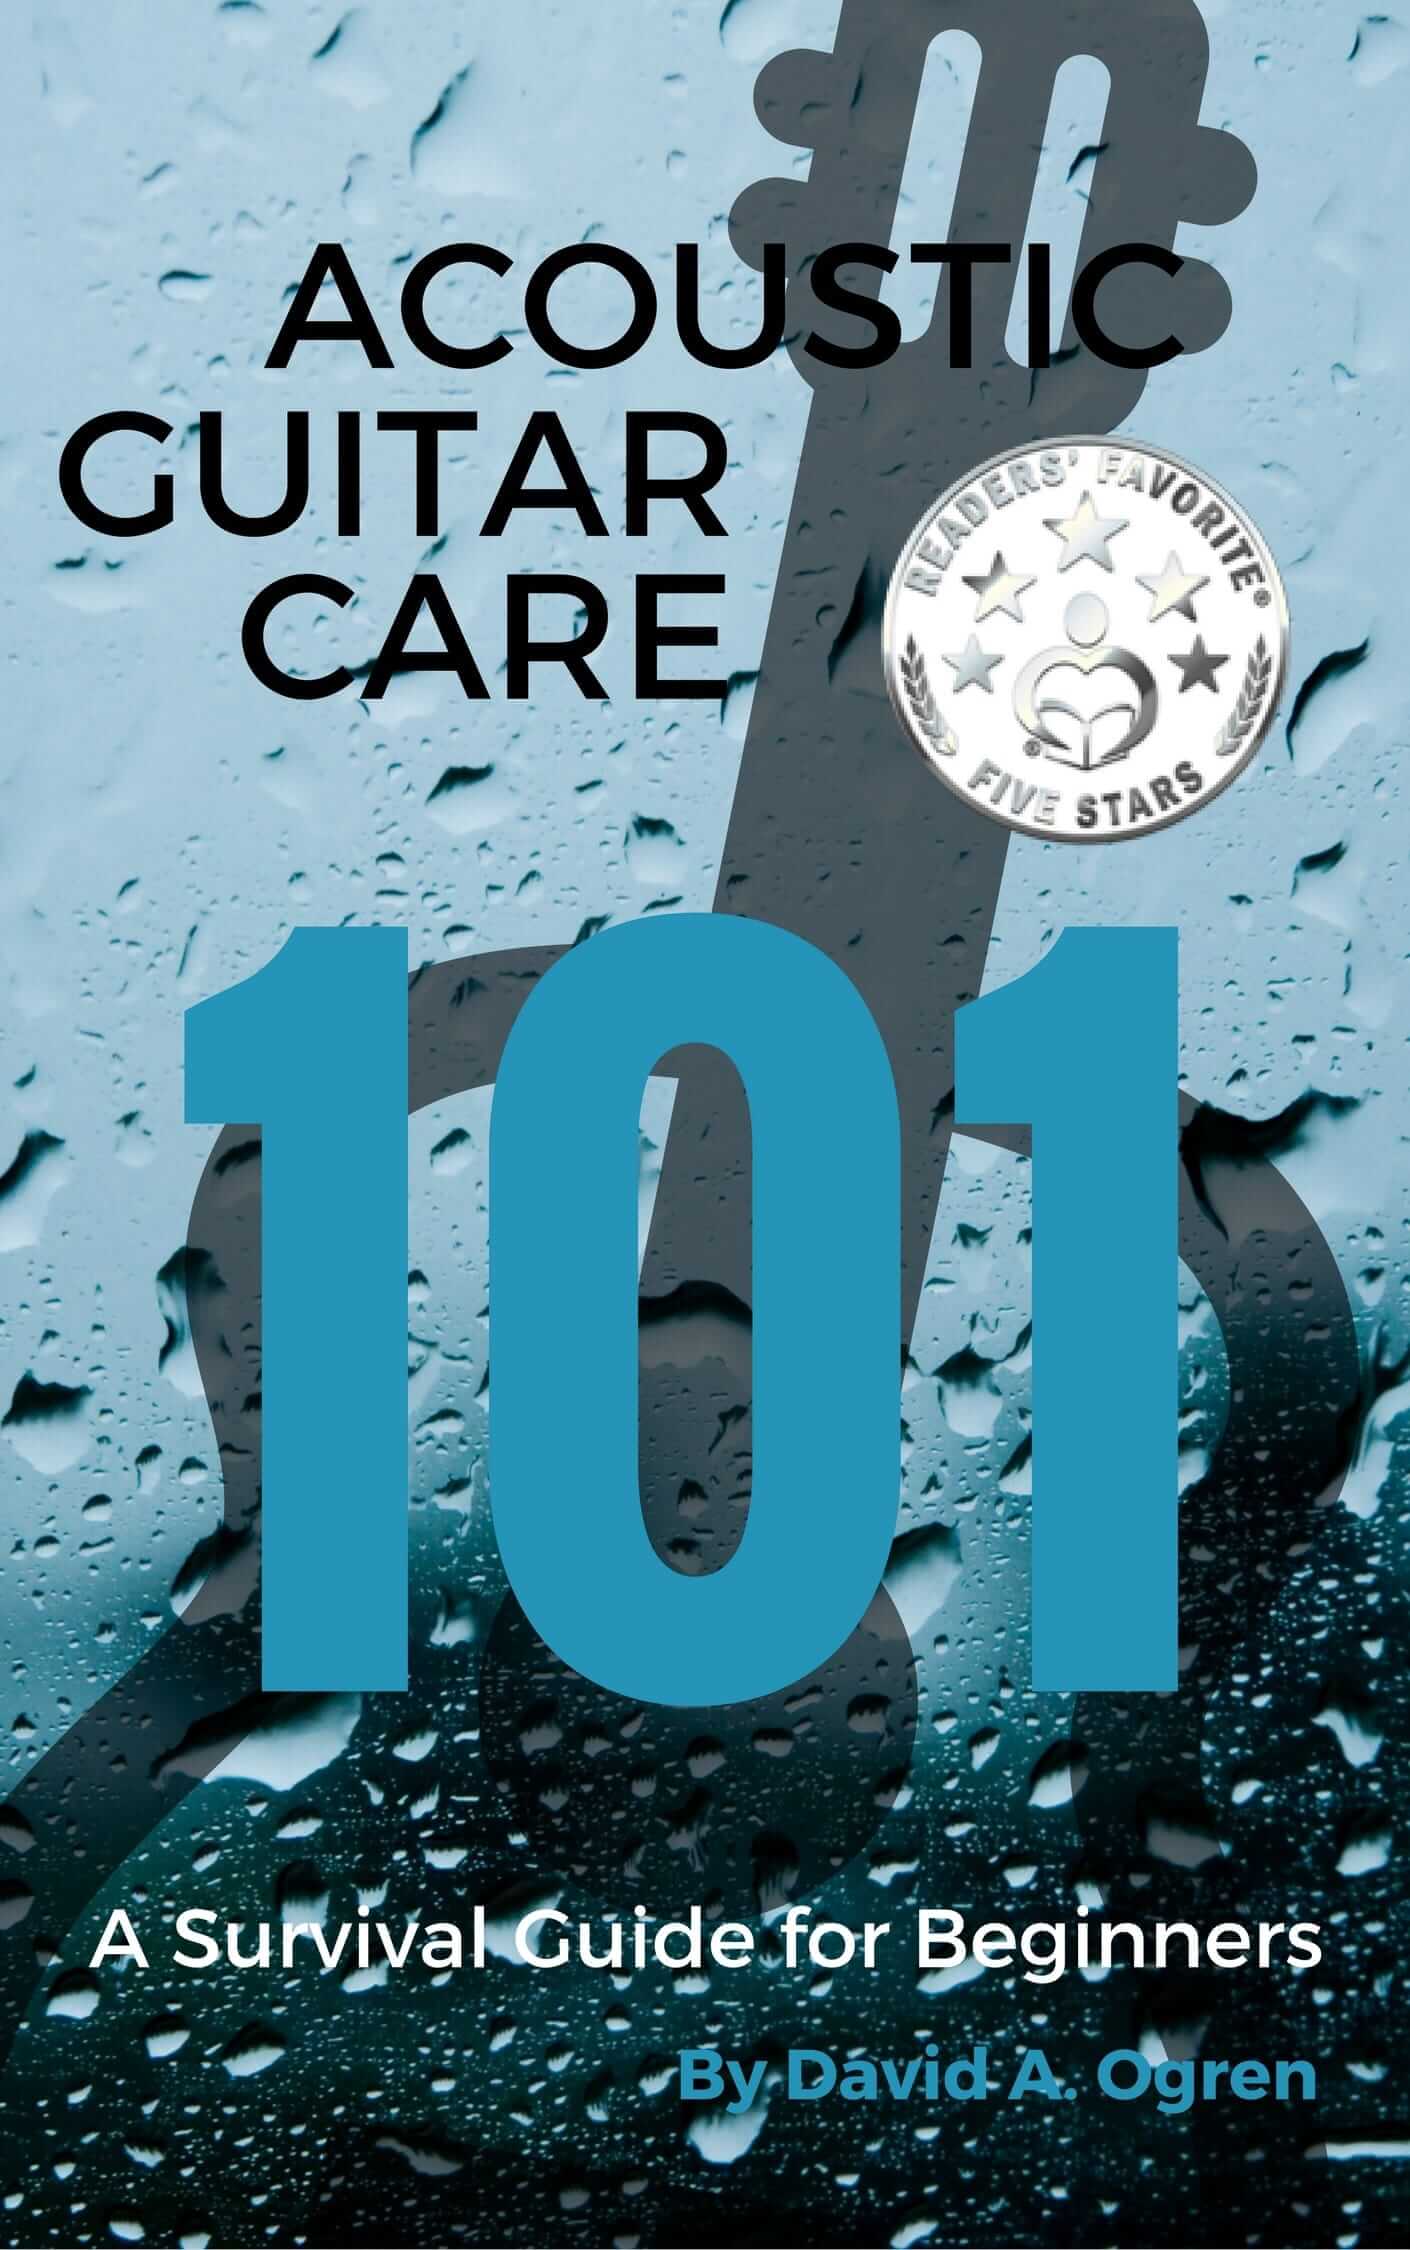 FREE: Acoustic Guitar Care 101: A Survival Guide for Beginners by David A. Ogren